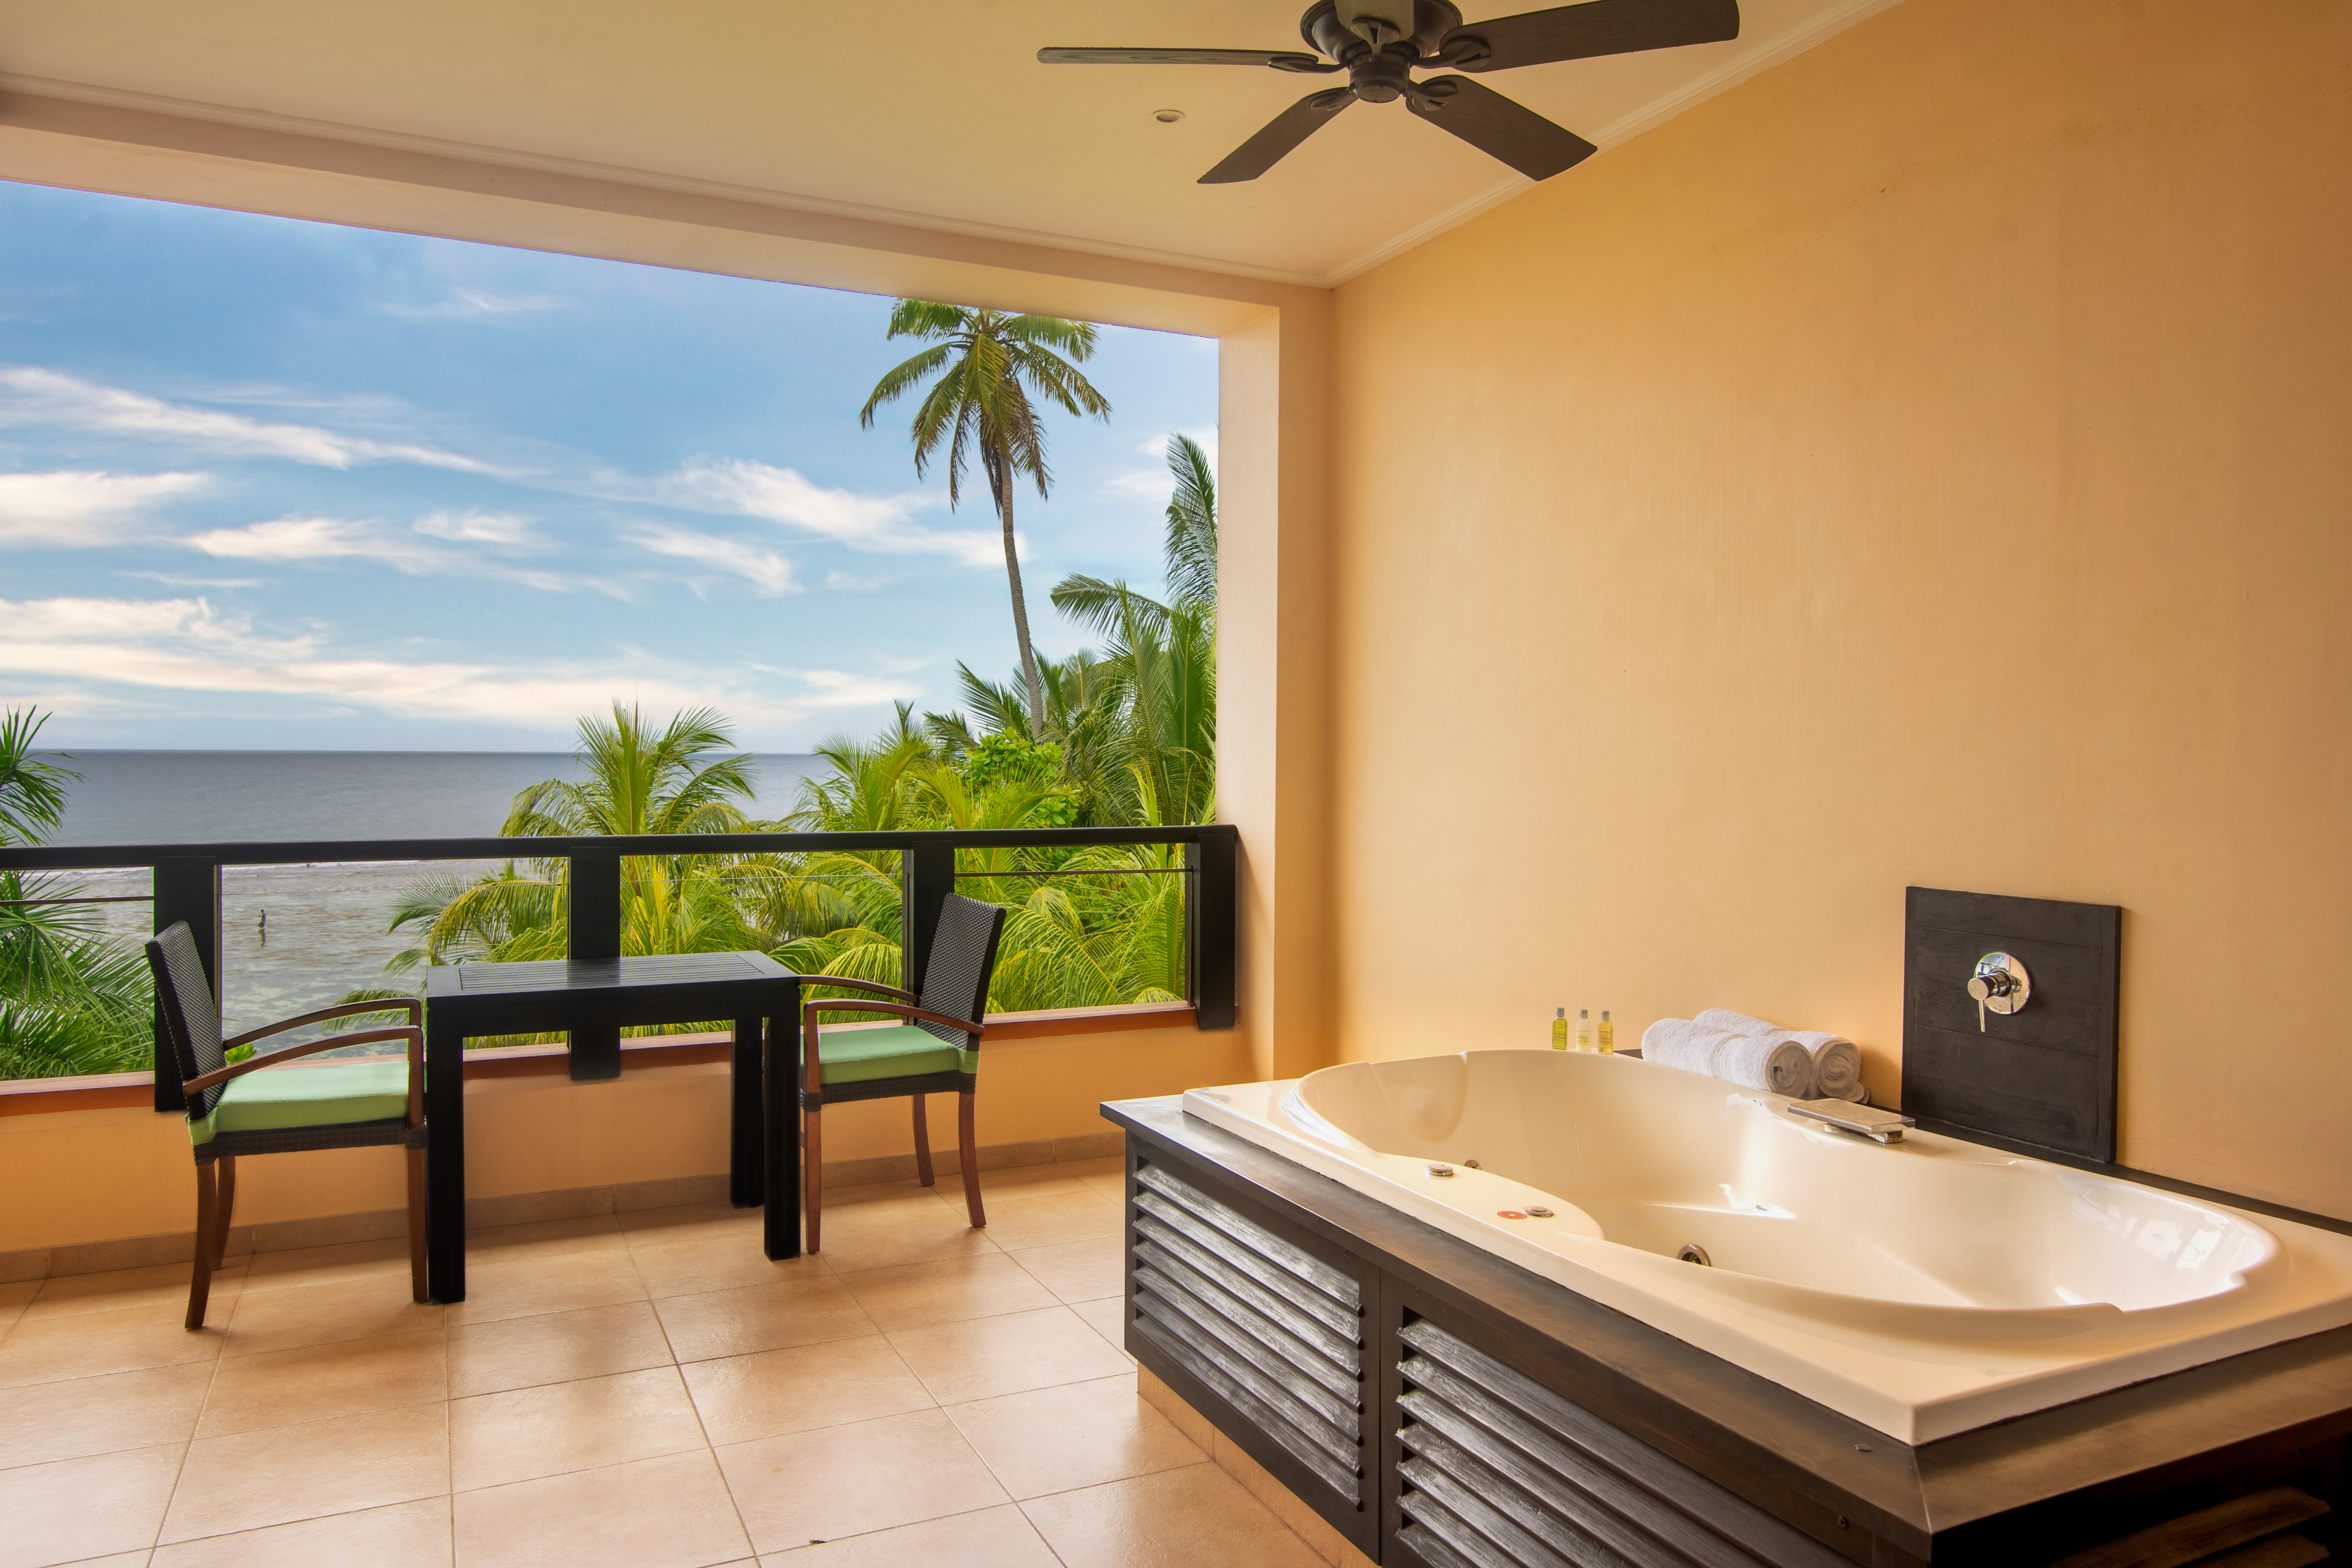 Bathtub and Balcony in Guest Room with Ocean View